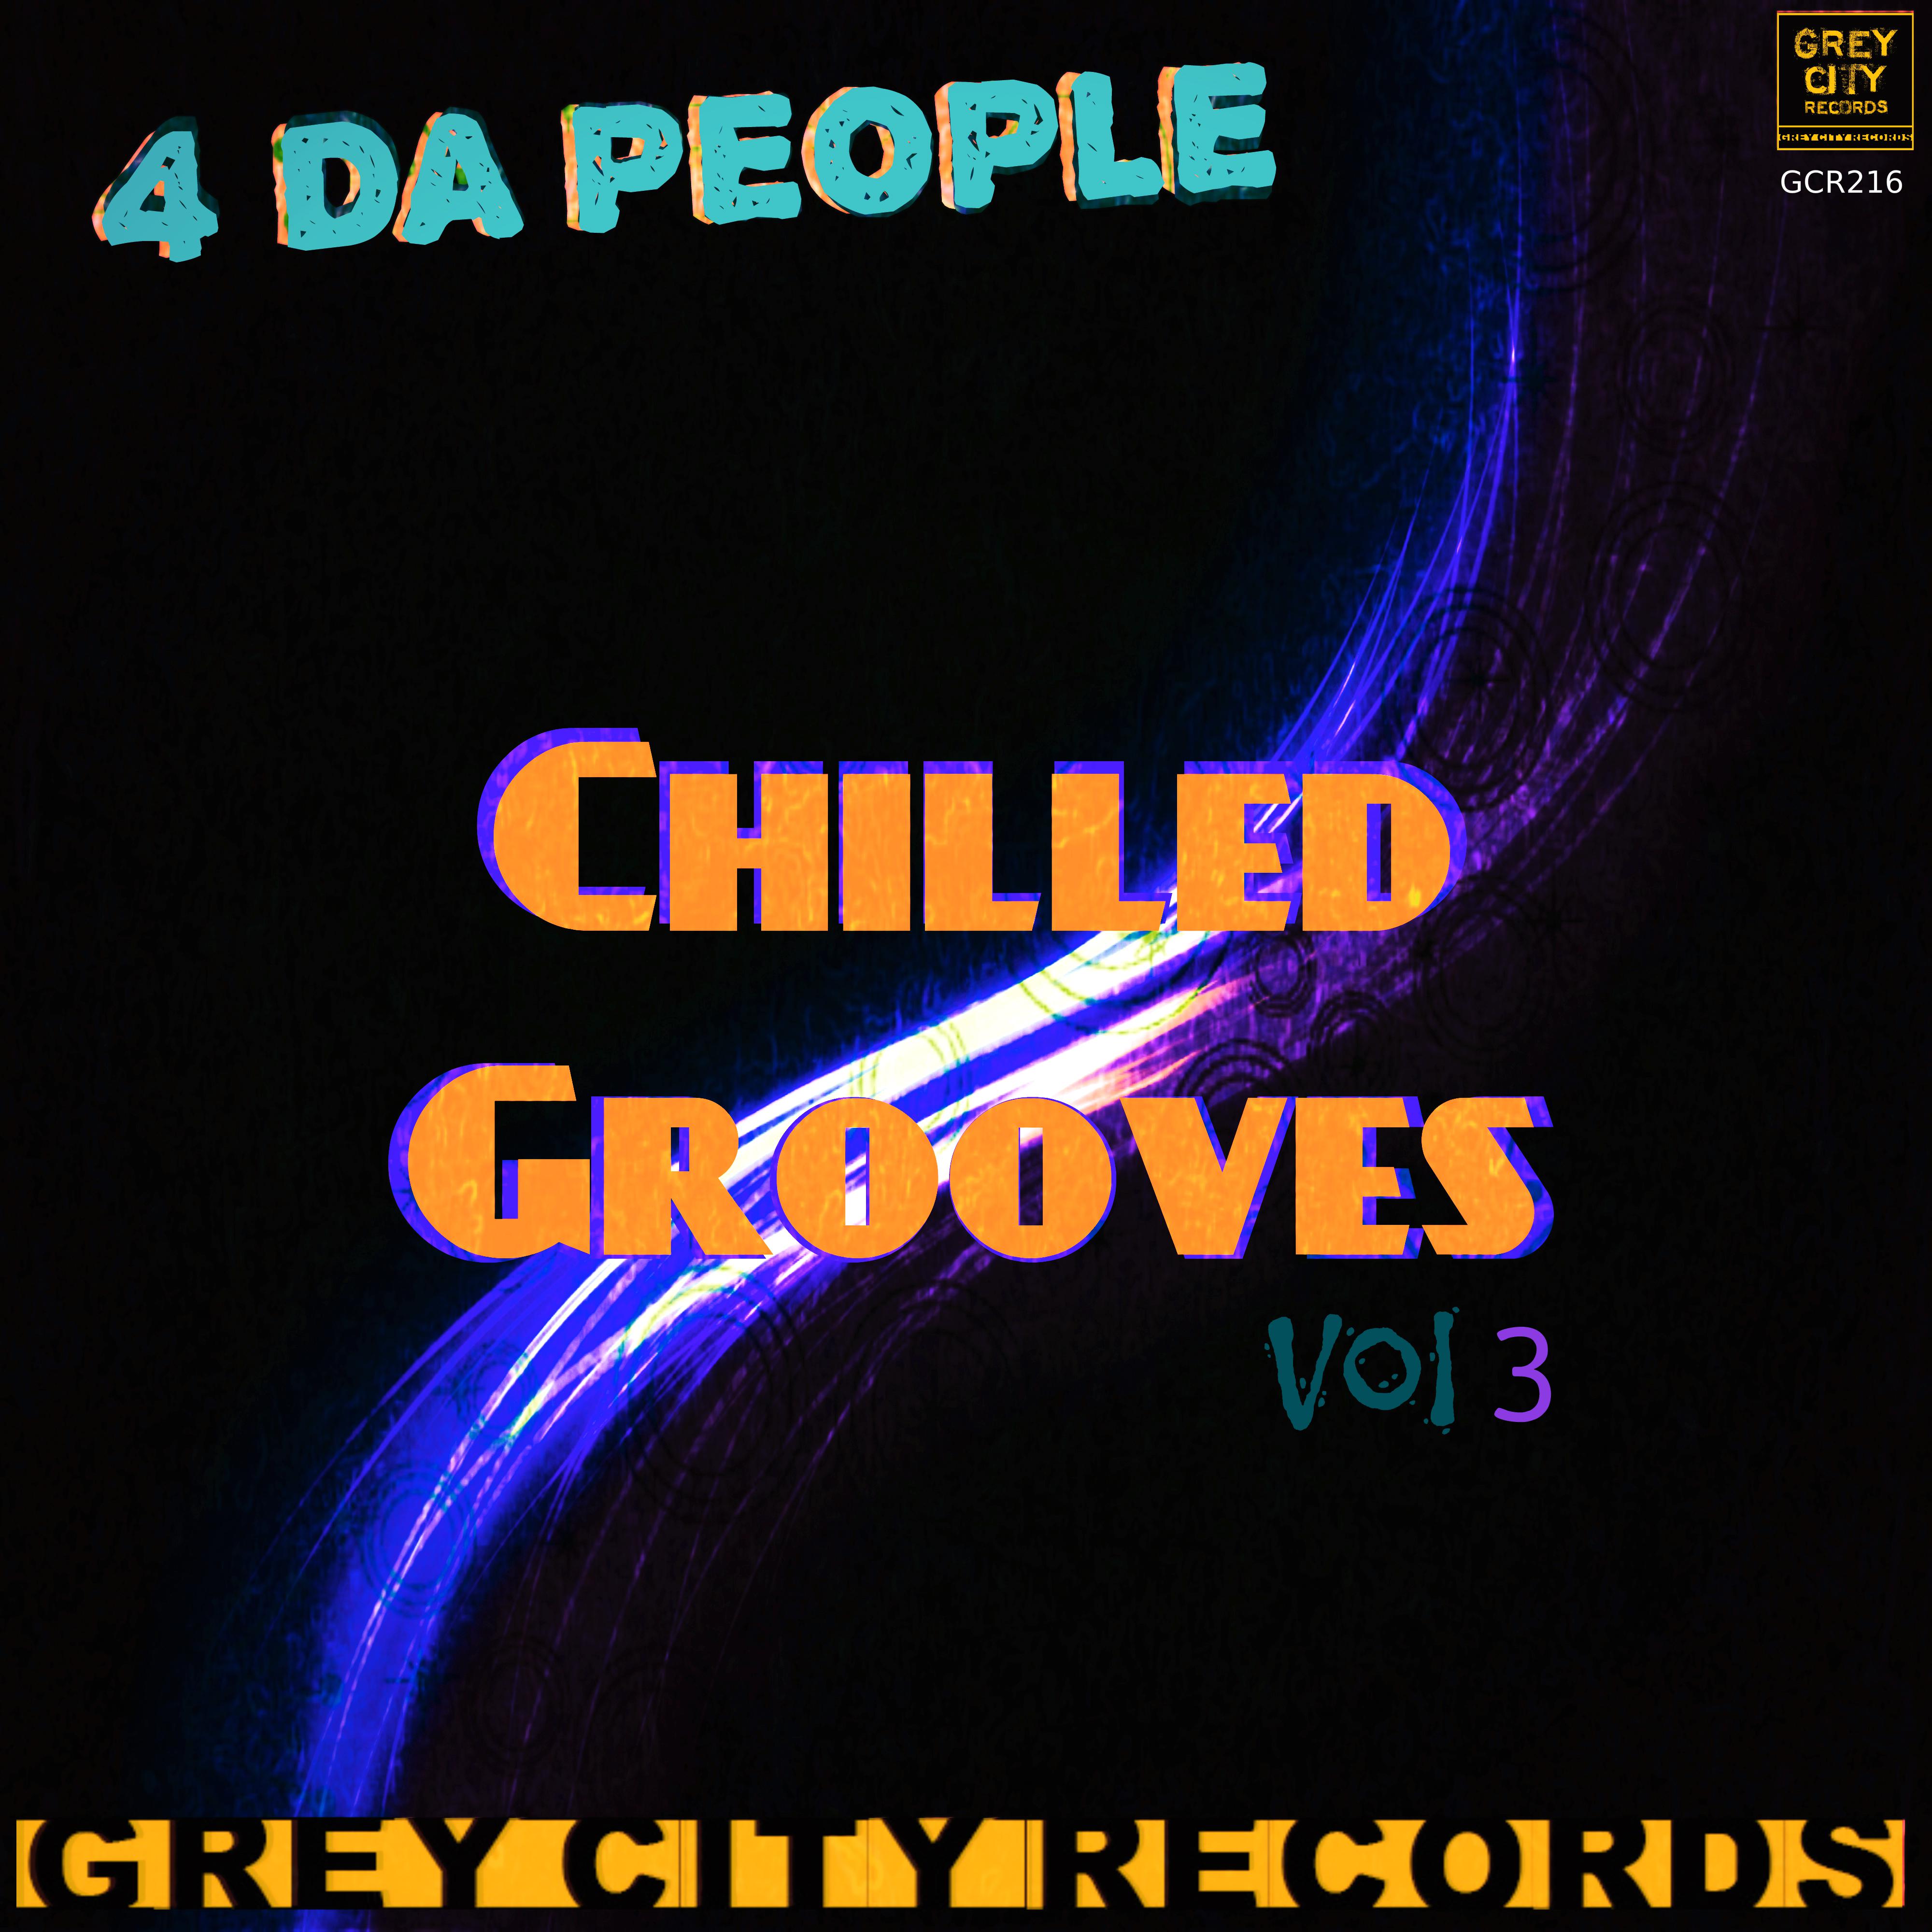 Chilled Grooves, Vol. 3